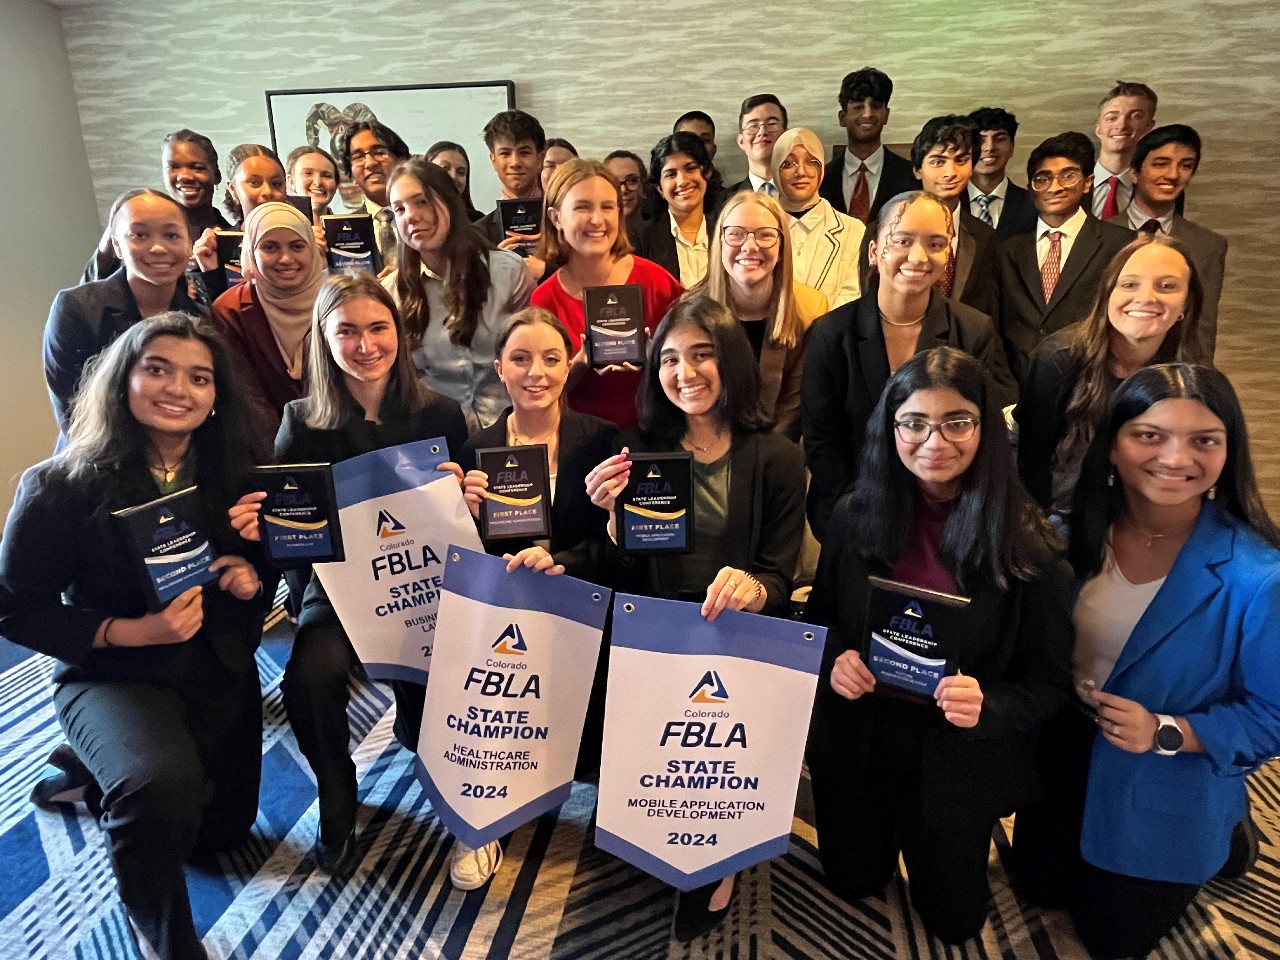 FBLA group posing together with their State Champion banners and plaques